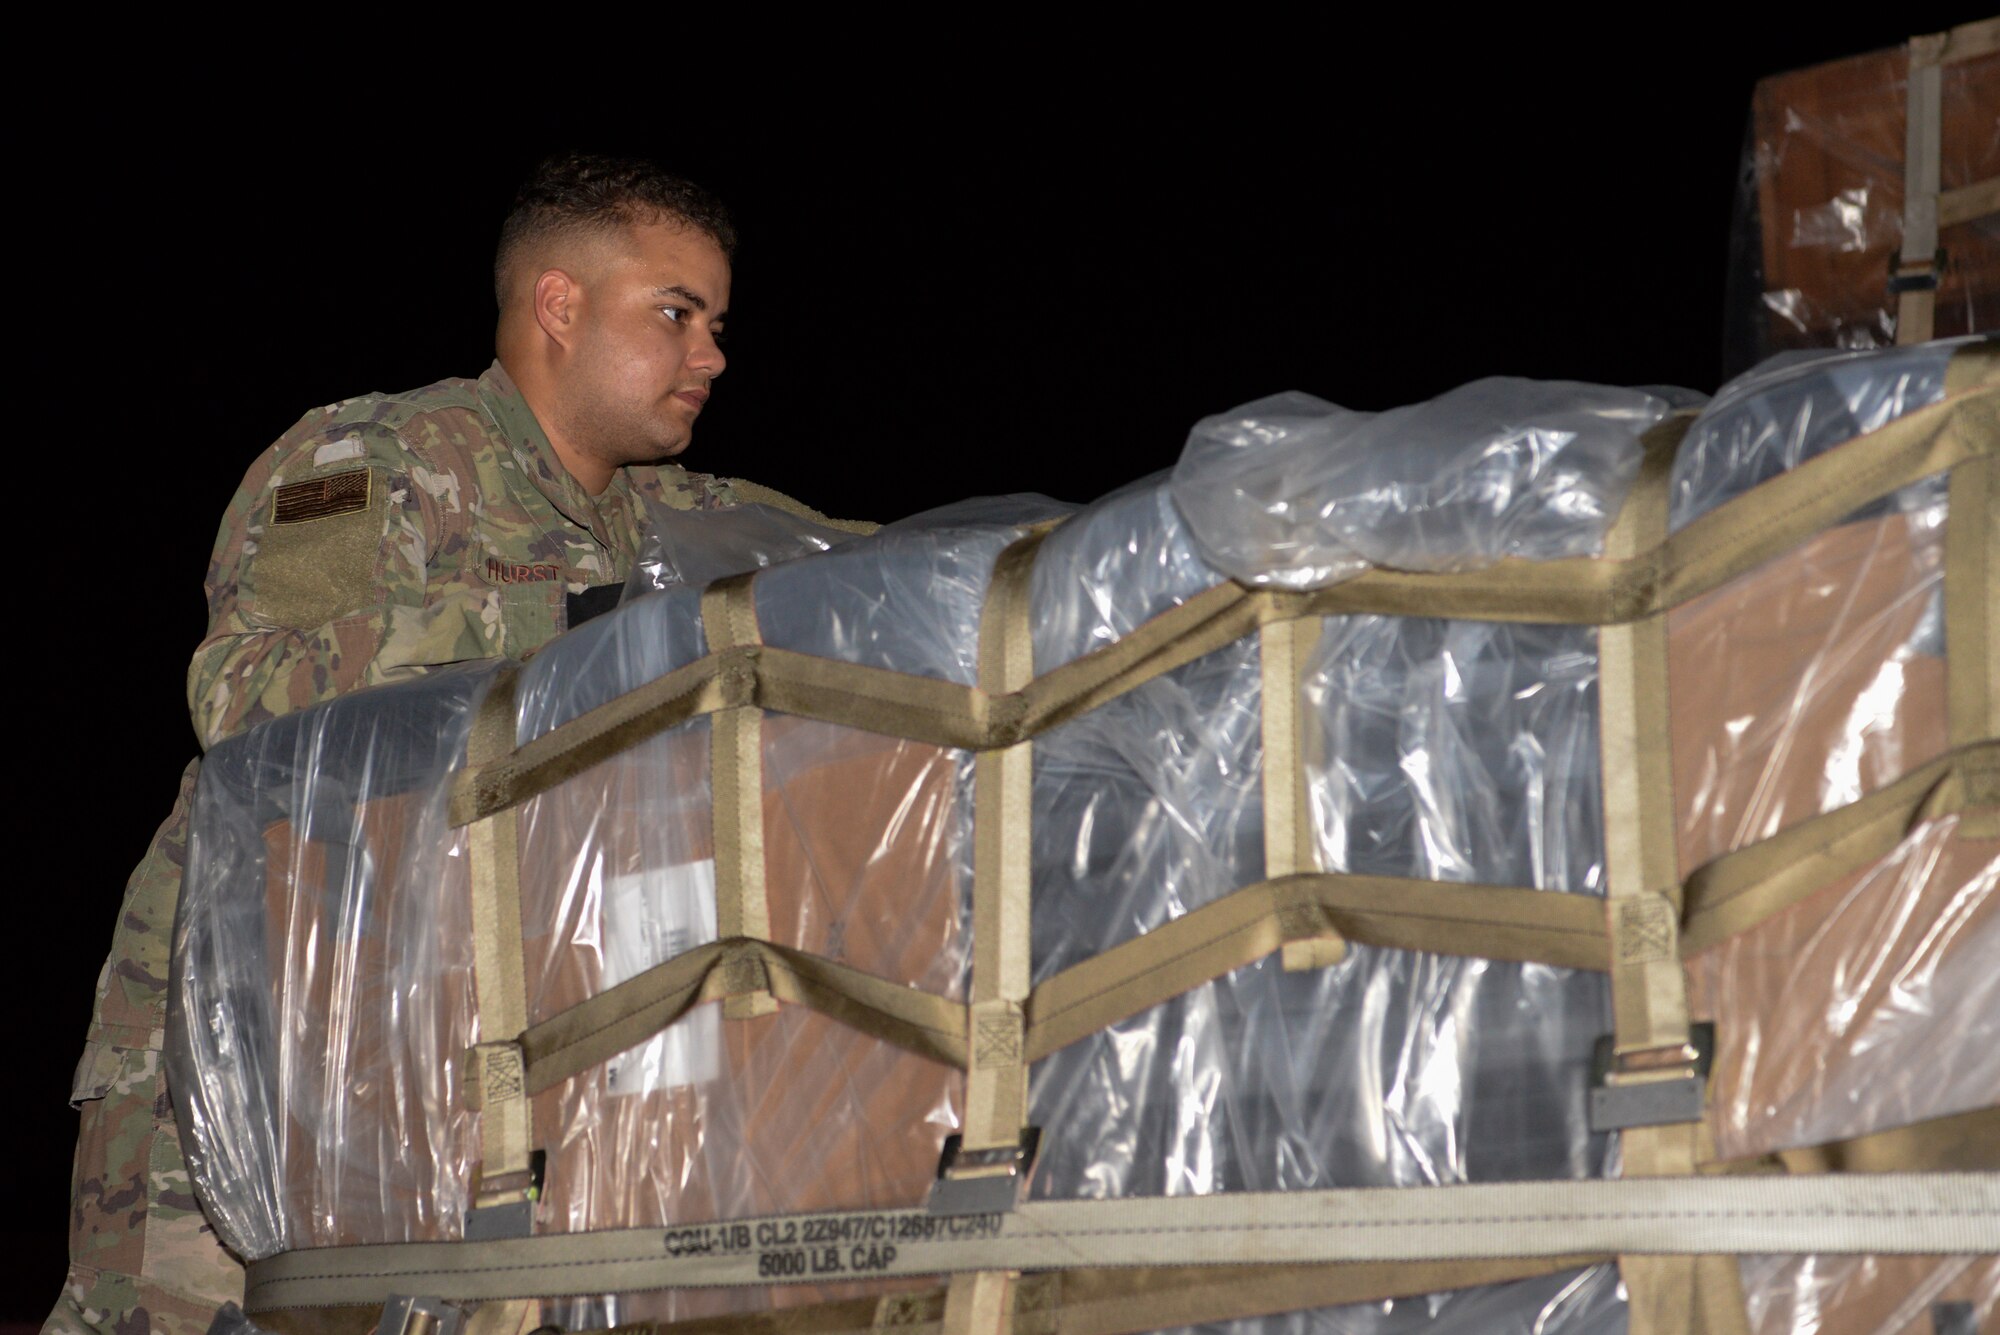 Senior Airman Cameron Hurst, 81st Logistics Readiness Squadron ground transportation specialist, conducts final checks on equipment at the 81st LRS compound on Keesler Air Force Base, Mississippi, September 4, 2019. Airmen from the 81st LRS palletized emergency medical equipment, such as blankets, litters and beds, and drove the gear more than 10 hours to MacDill Air Force Base, Florida, as part of the relief efforts for Hurricane Dorian. The 81st LRS worked with the 6th LRS at MacDill to get the equipment shipped through ground transportation instead of through airlift therefore saving delivery time to get the life-saving equipment to those in need. (Airman 1st Class Spencer Tobler)